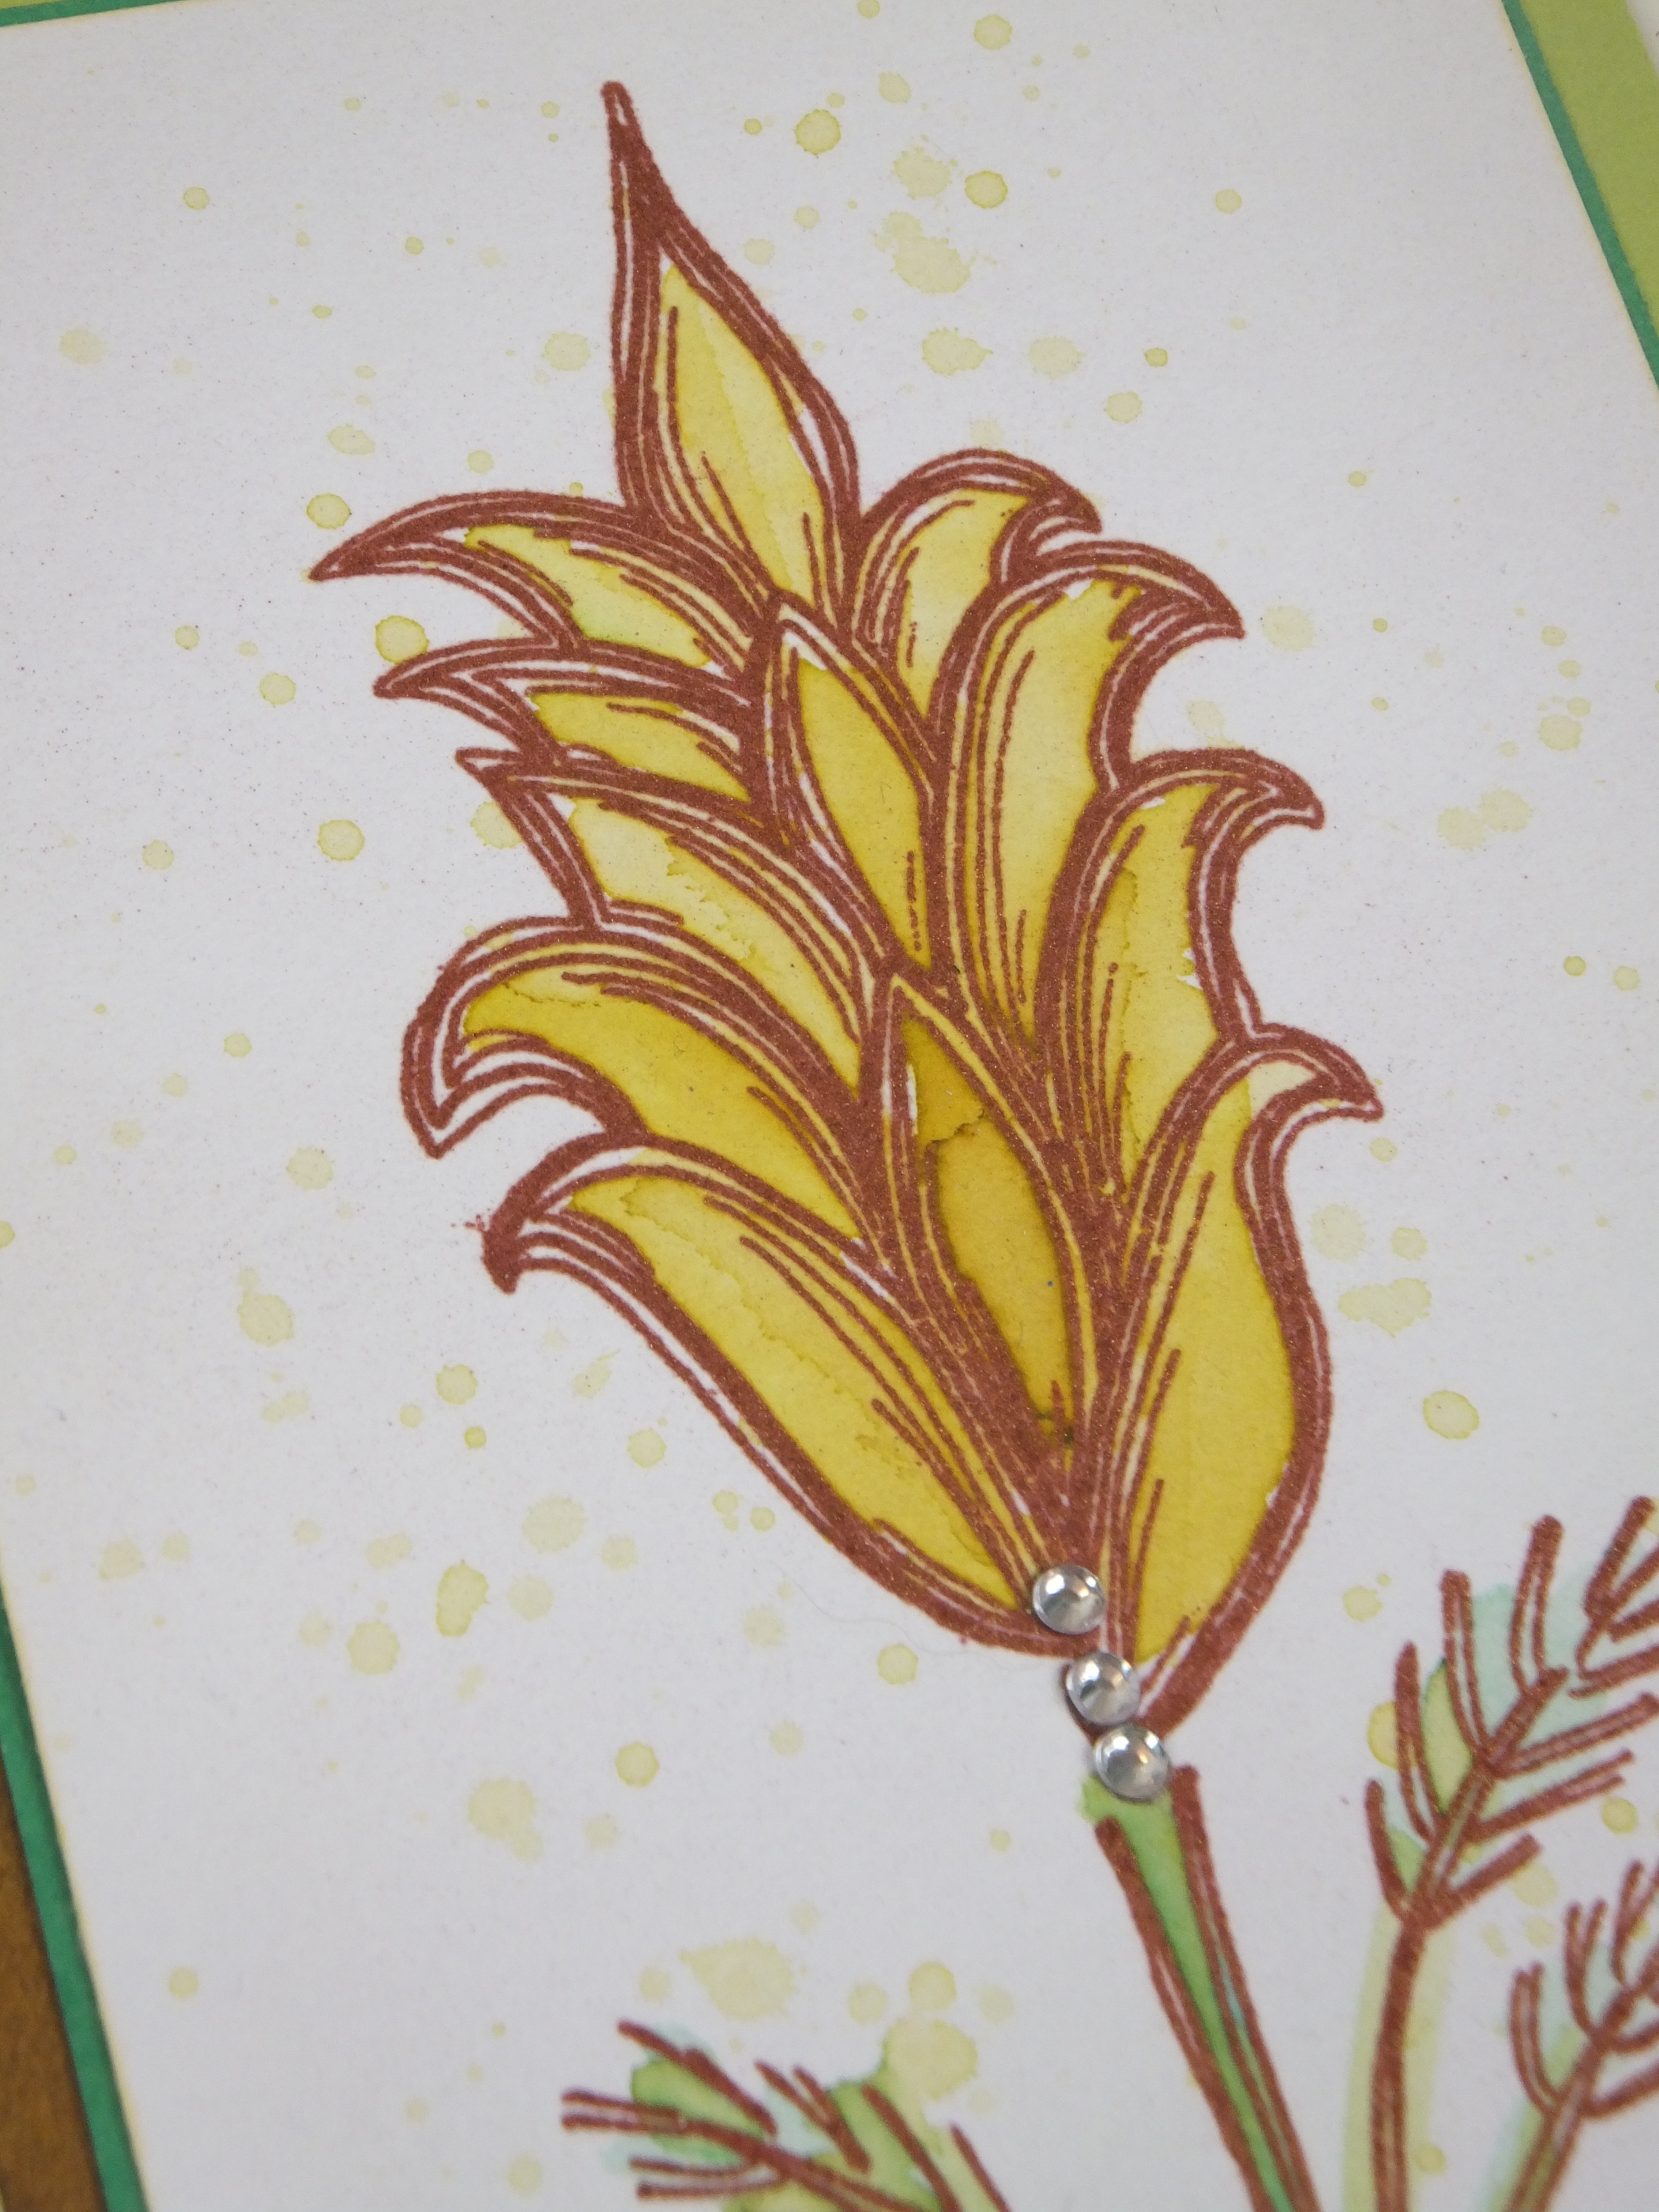 Technique of the Month: Watercoloring with Color Burst and PaperArtsy